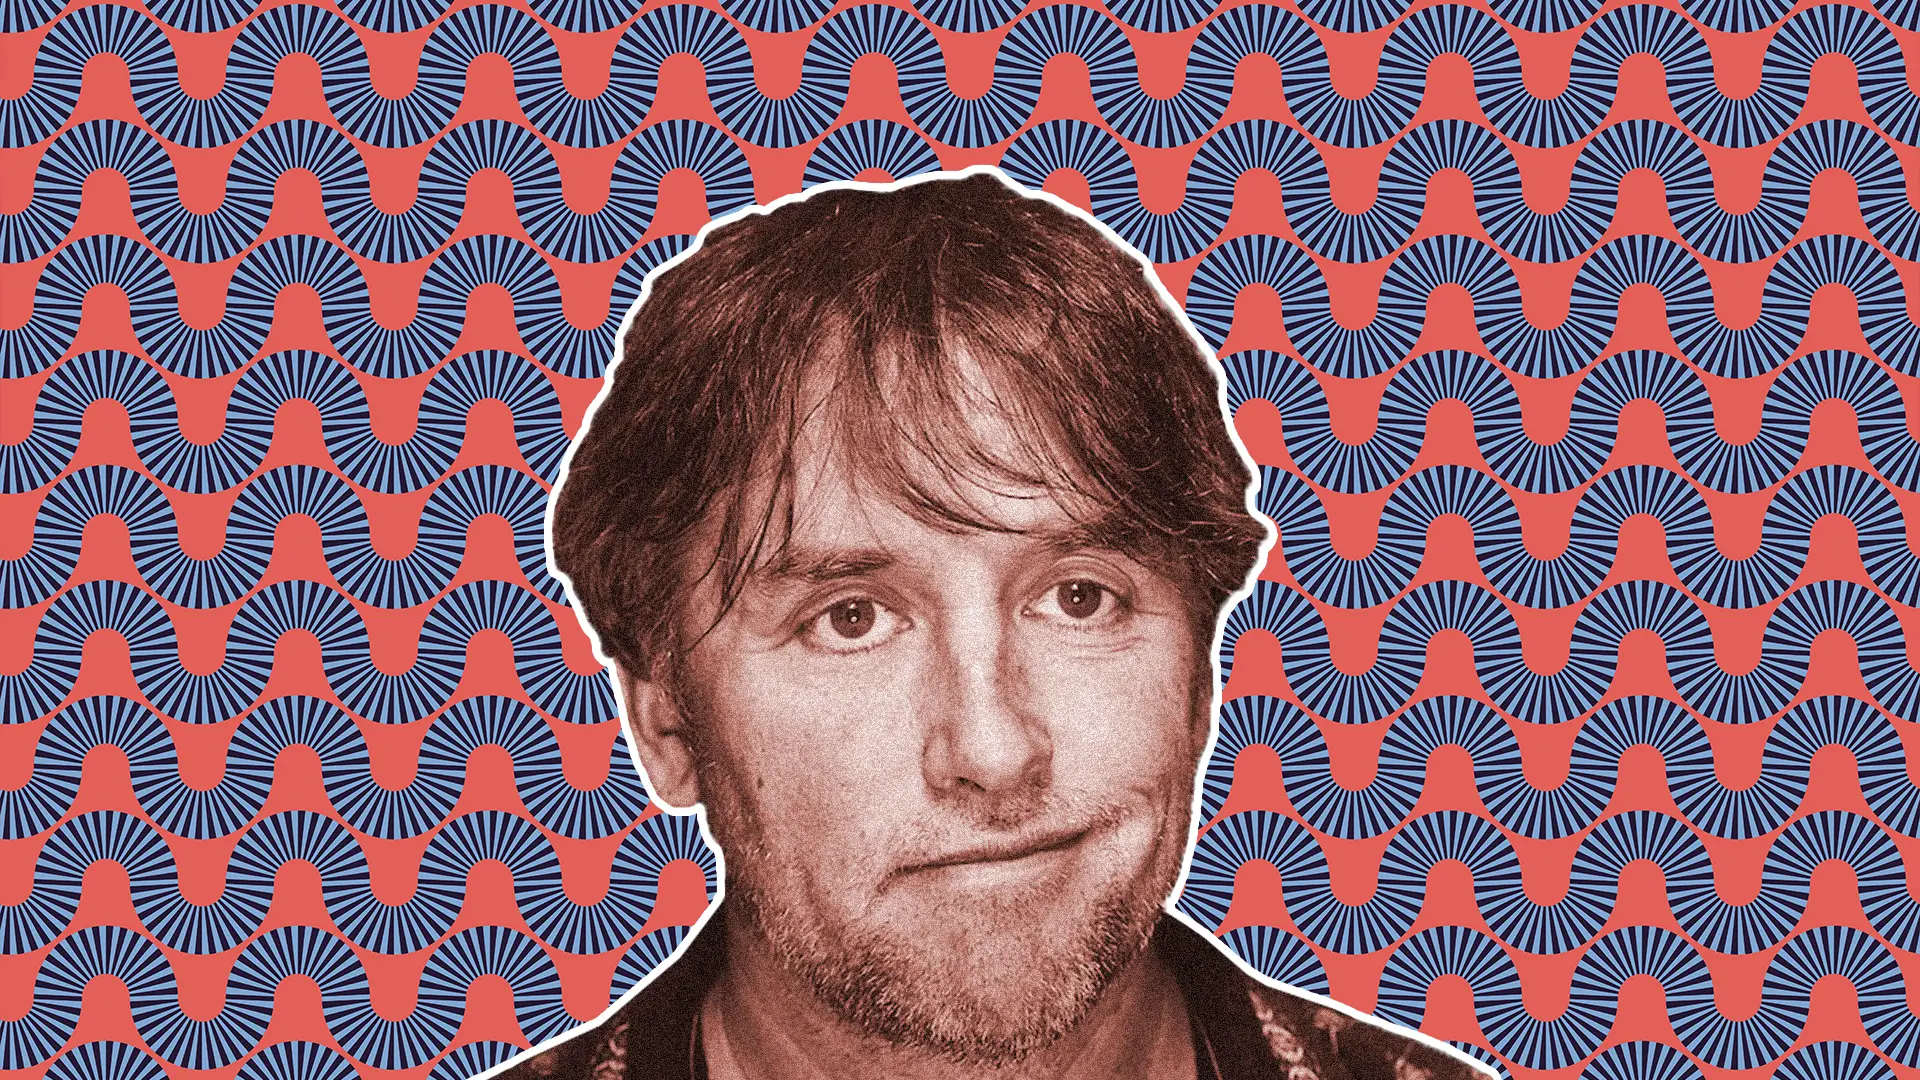 Richard Linklater: A Self-taught Filmmaker Who Defied the Hollywood System | Features | LIVING LIFE FEARLESS